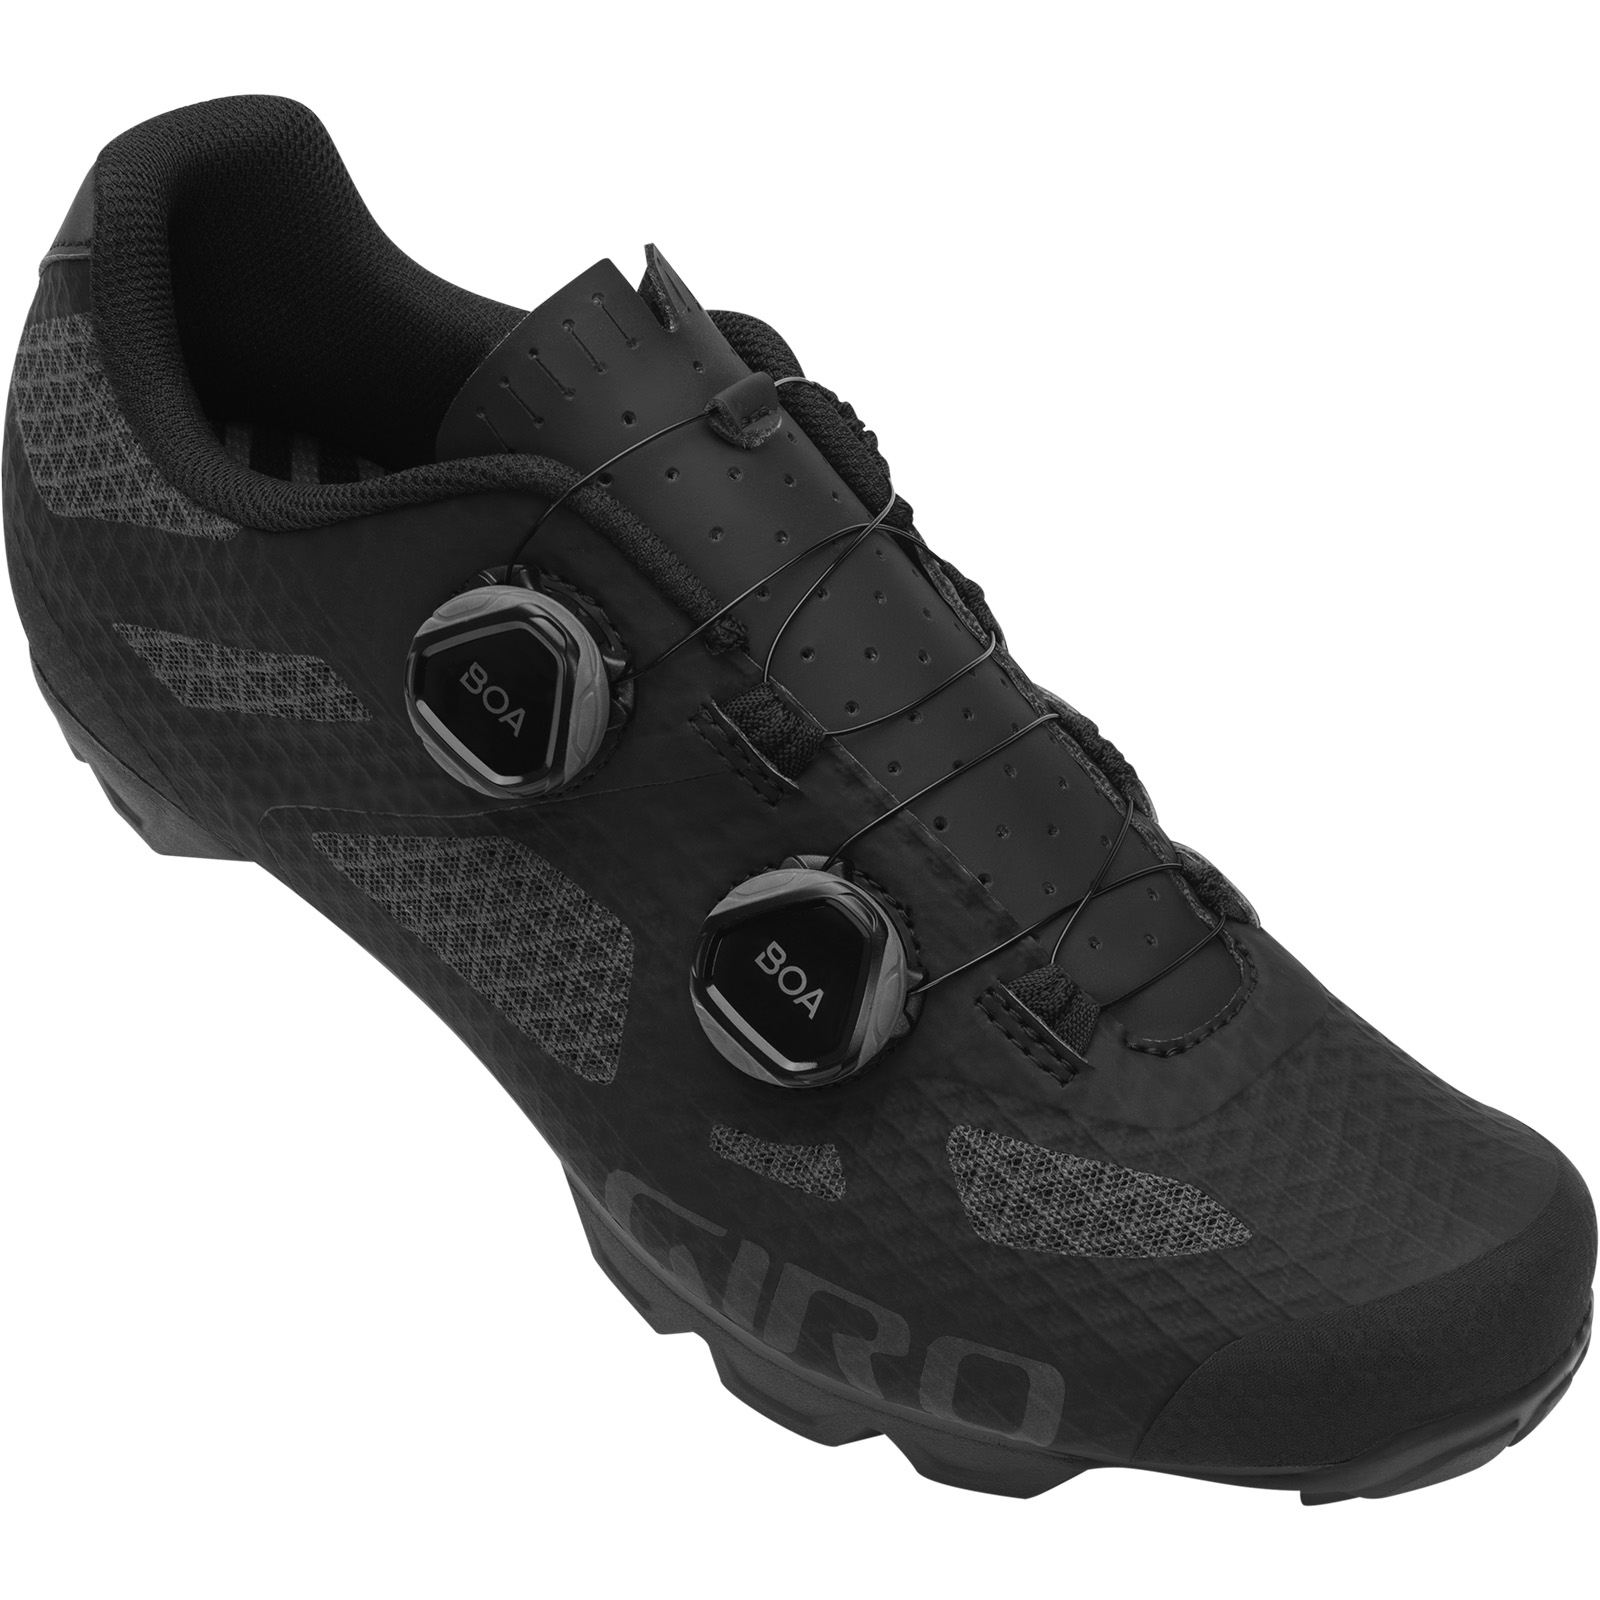 Picture of Giro Sector MTB Shoes - black/dark shadow